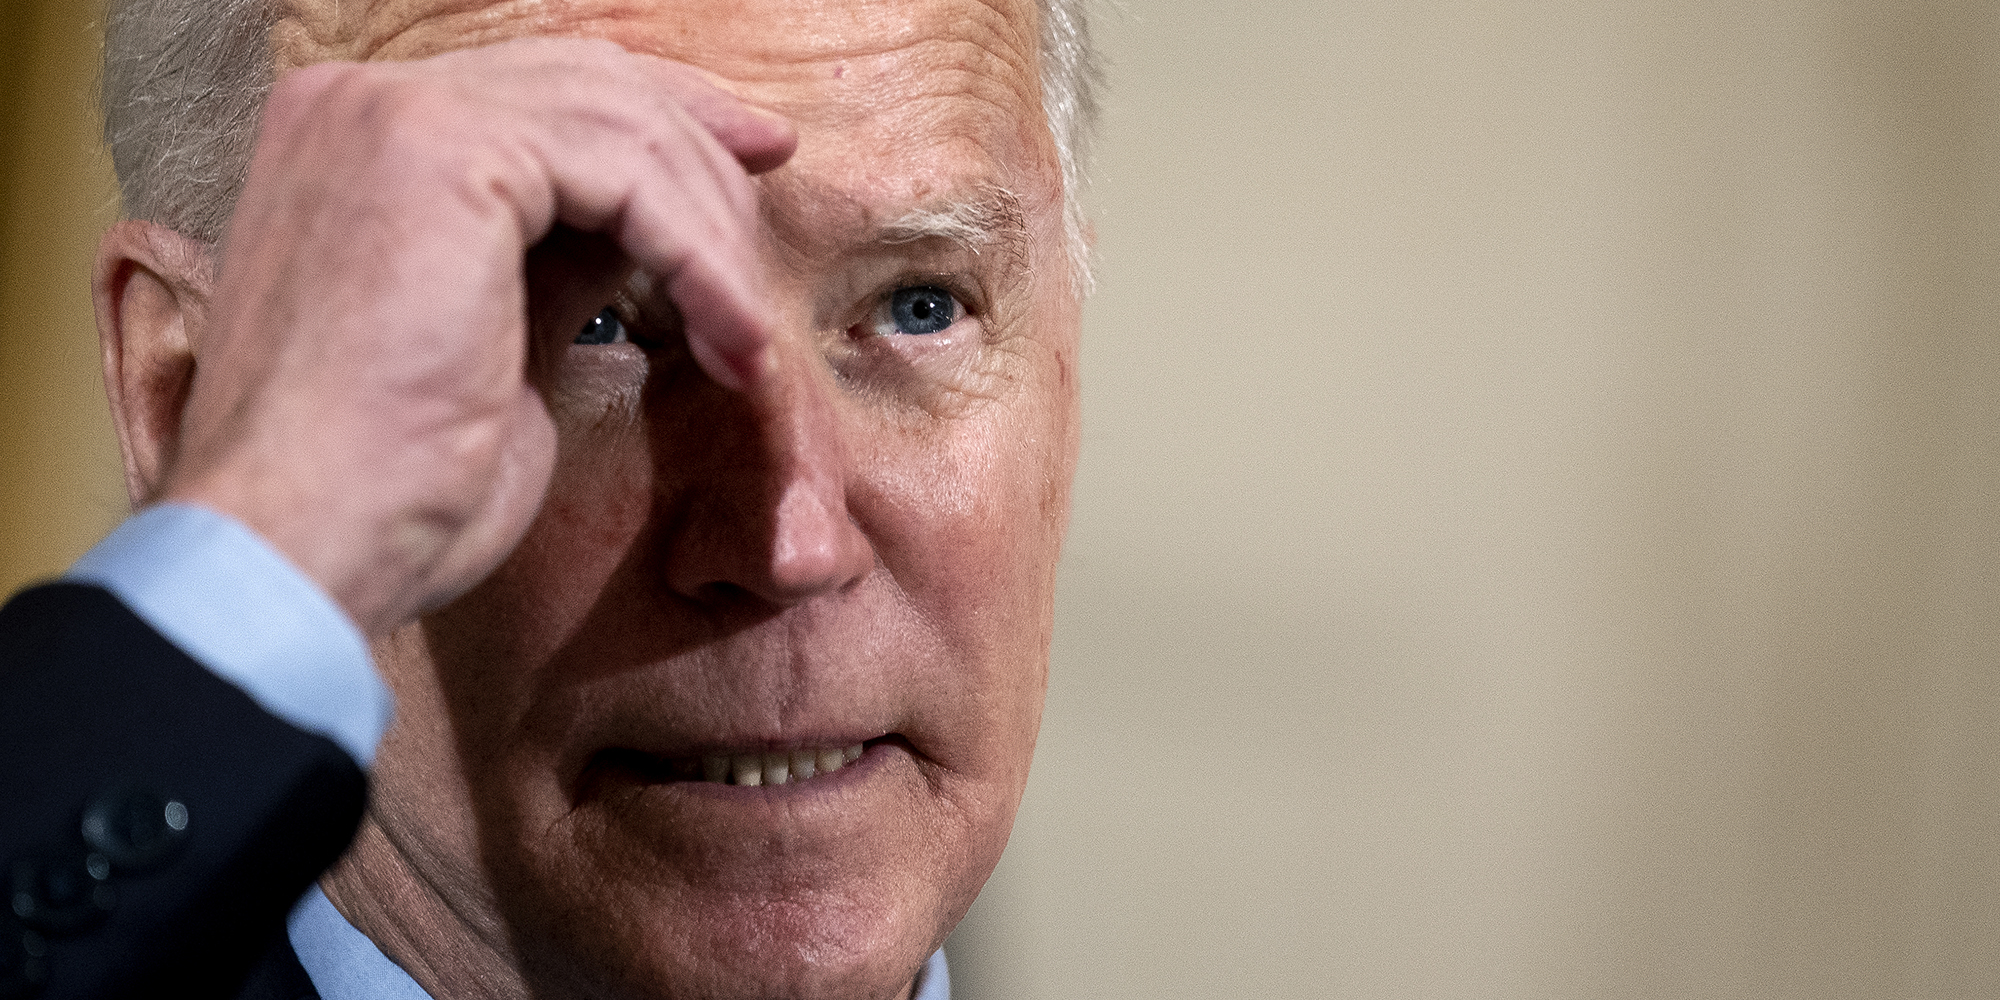 biden-faces-pandemic-without-key-health-officials-in-their-posts